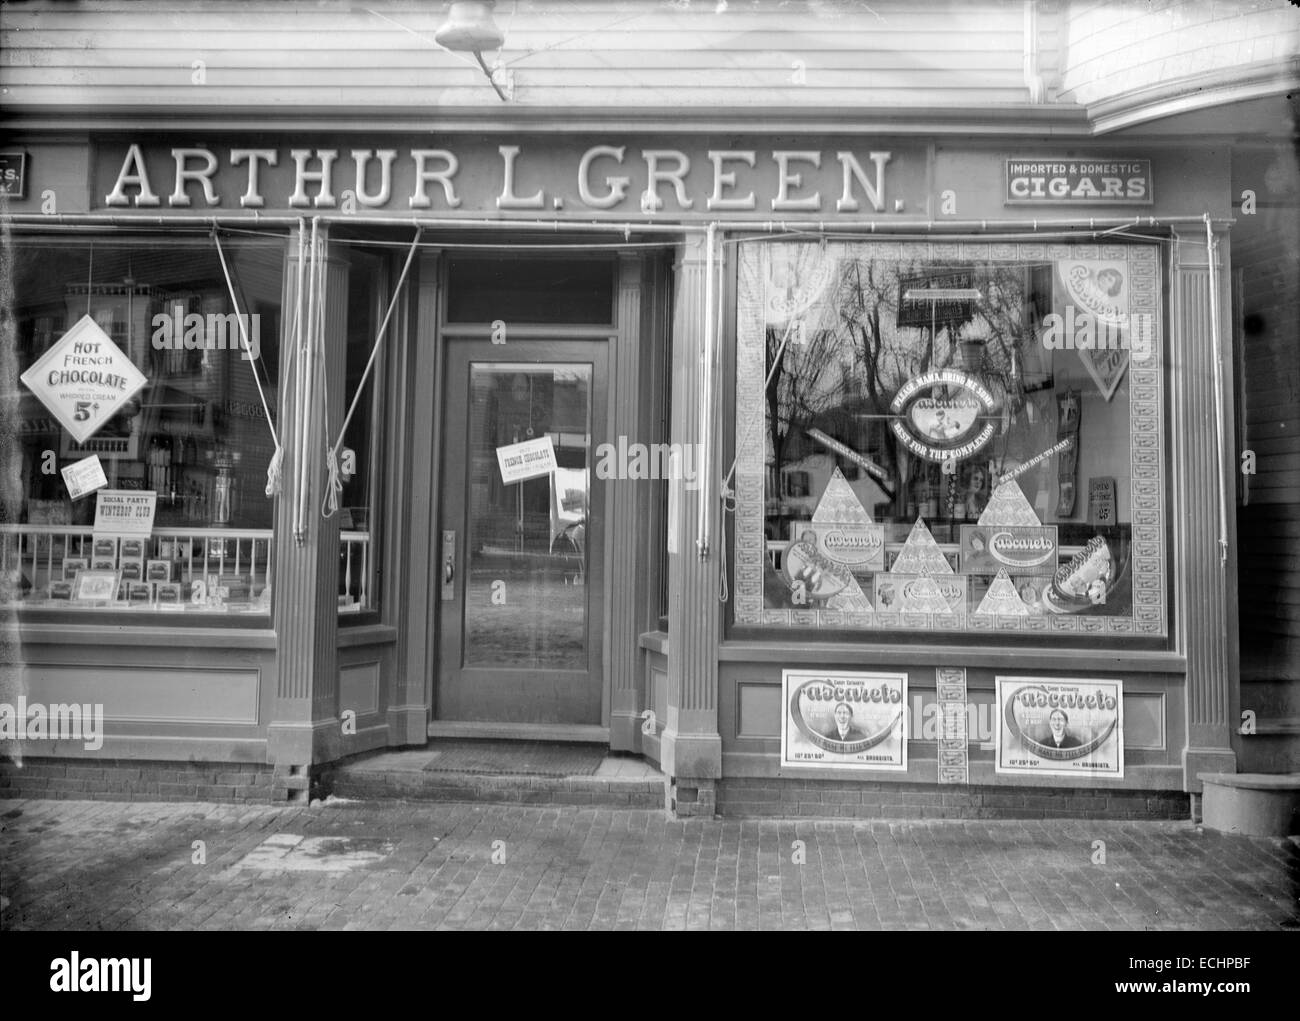 Antique, circa 1905 image, Arthur L. Green pharmacy, located at 2 School St. in Manchester-by-the-Sea, Massachusetts, USA. Stock Photo